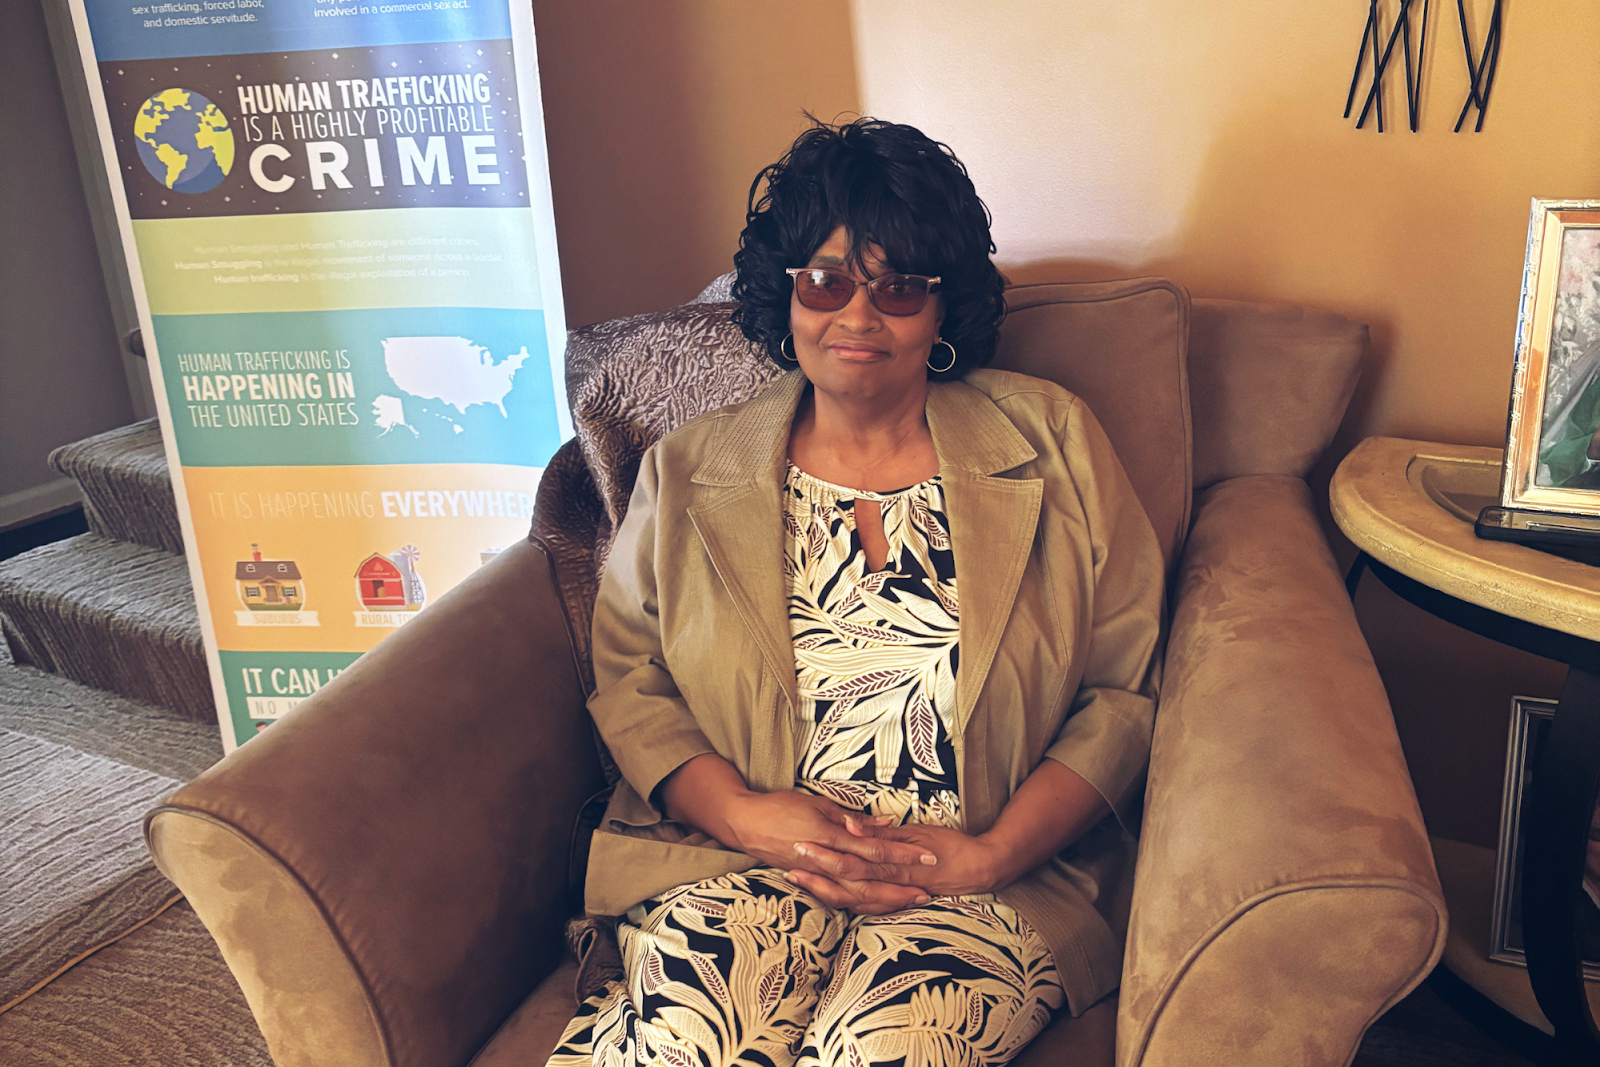 Mrs. Brenda Anderson discusses her community work in the Sarvis Park neighborhood, her nonprofit organization, and her mission to combat human trafficking. 